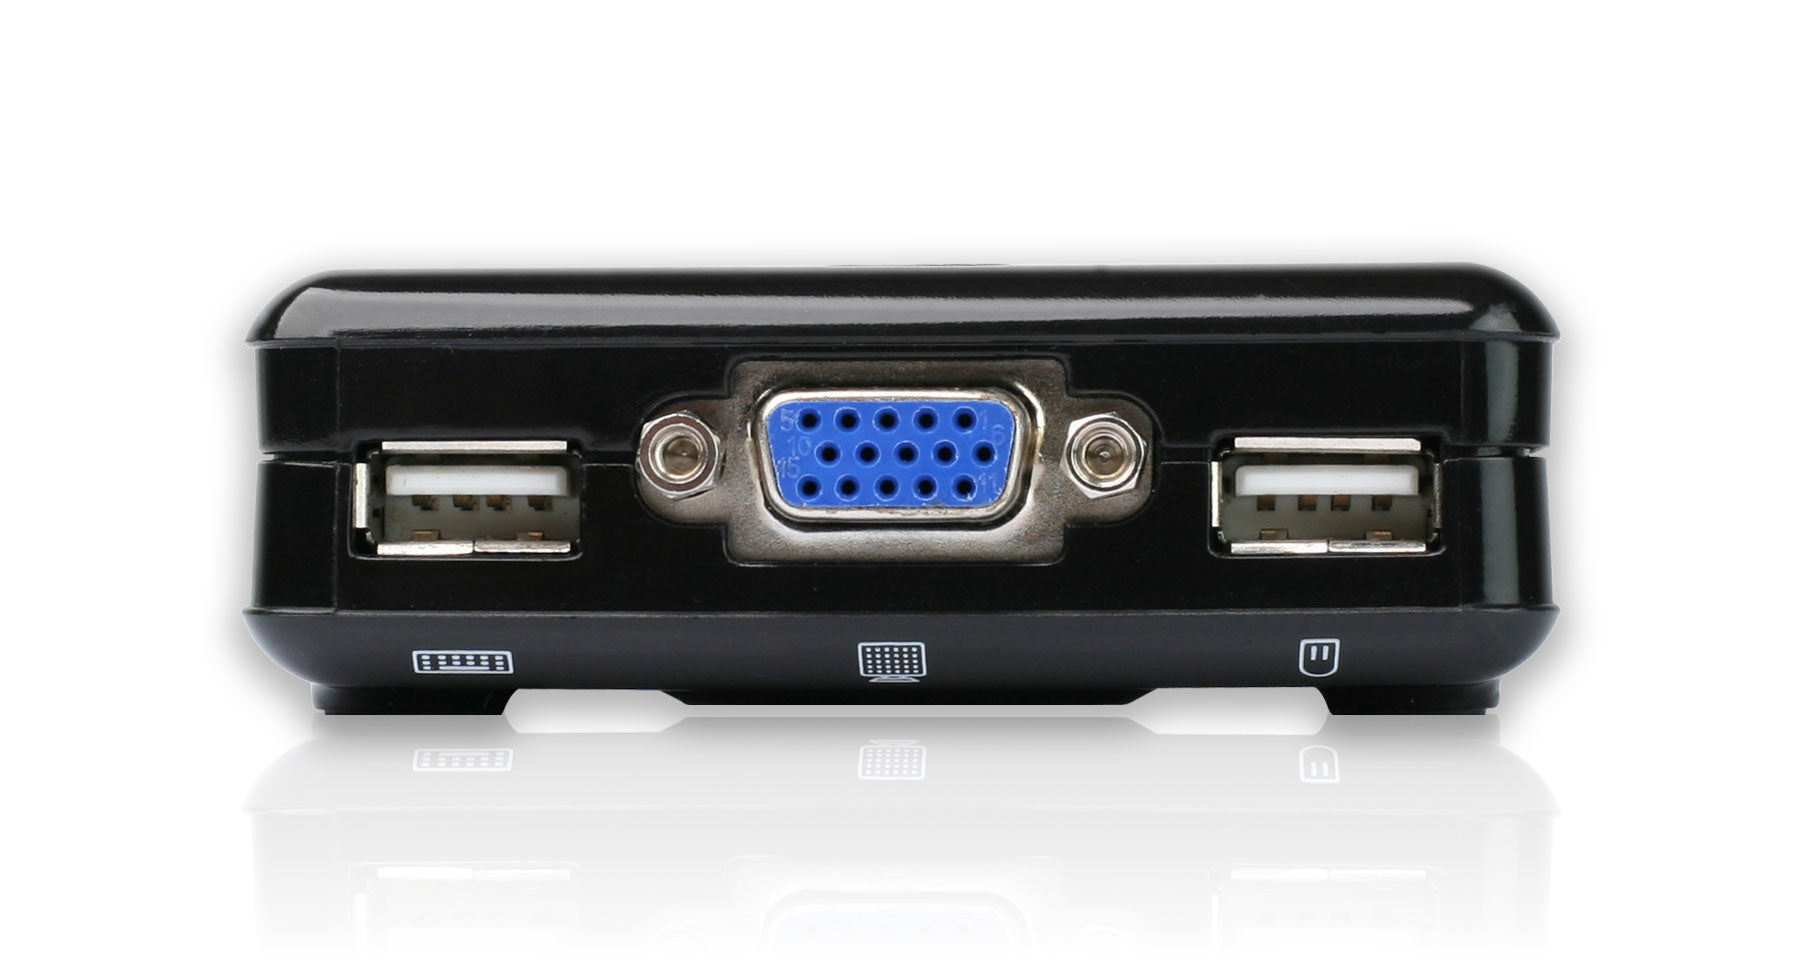 2-Port Compact USB VGA KVM with Built-in Cables